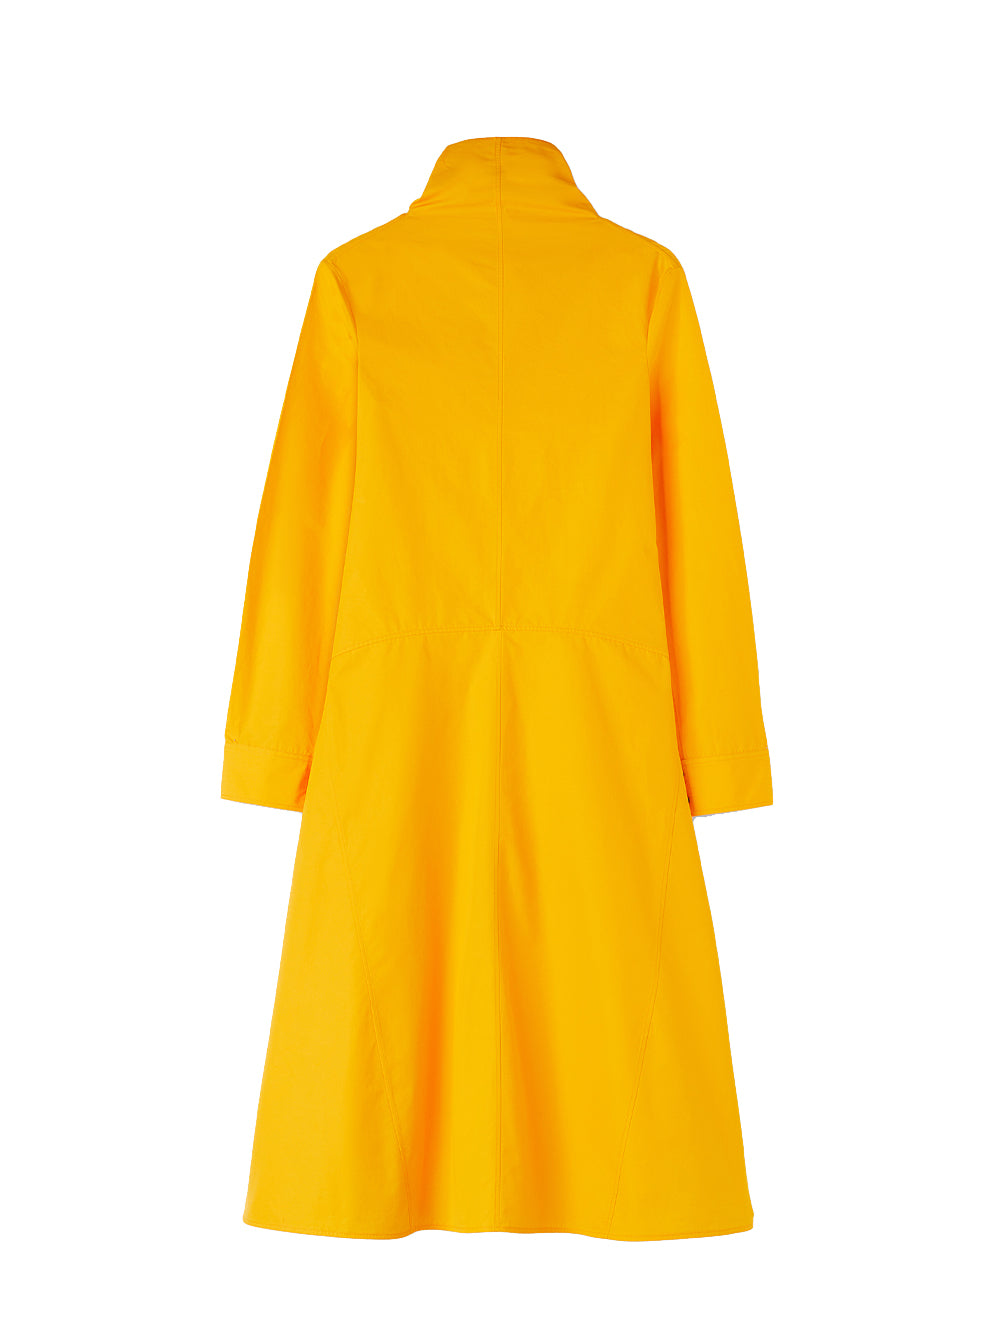 Relaxed Fit Calf Length Dress With Foulard Neckline, Voluminous Side Inserts And Long Sleeves With Cuffs. Invisible Zip Closure On The Side Mango